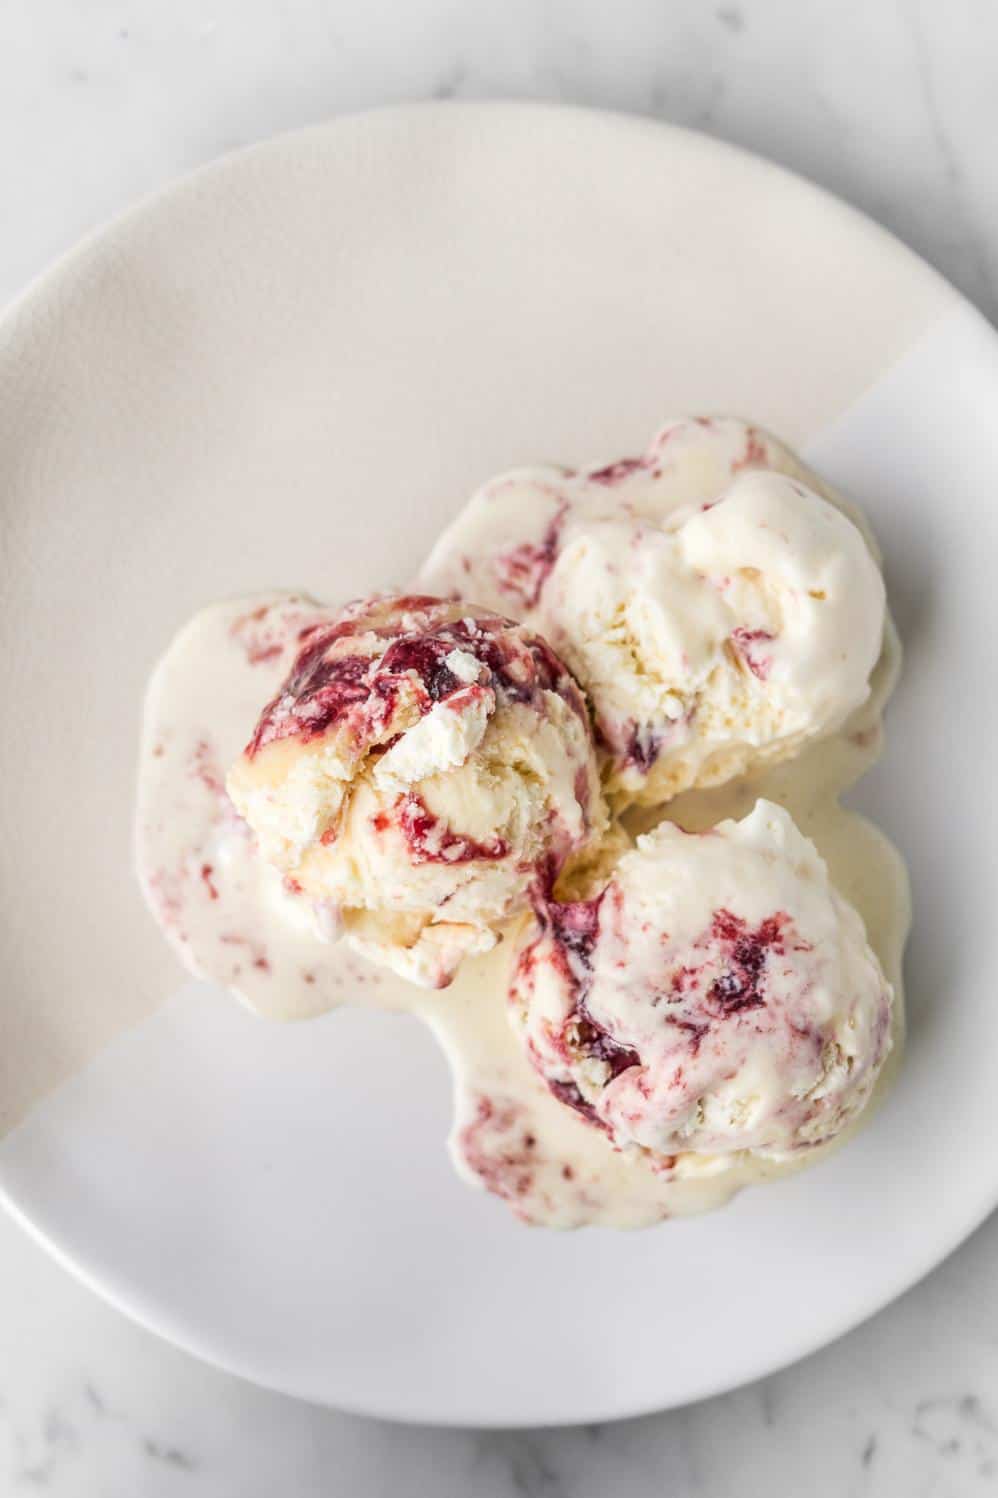  The scent of warm cherries and vanilla ice cream will fill your kitchen and delight your senses.